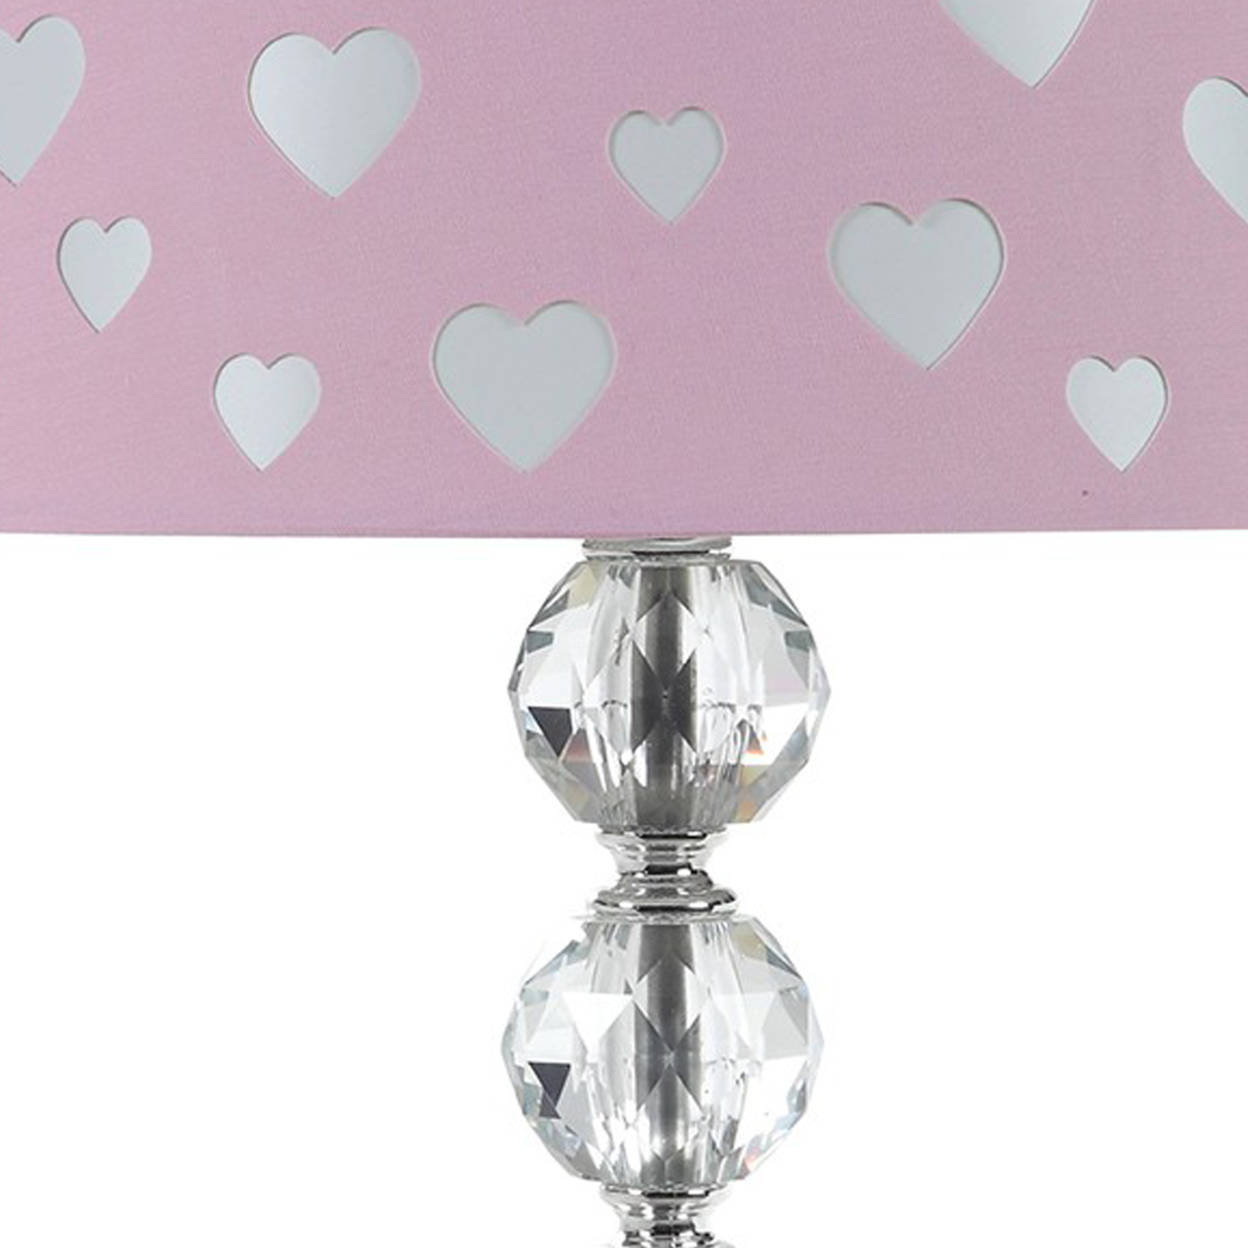 Table Lamp With Orb Stacked Base And Heart Shade, Silver- Saltoro Sherpi